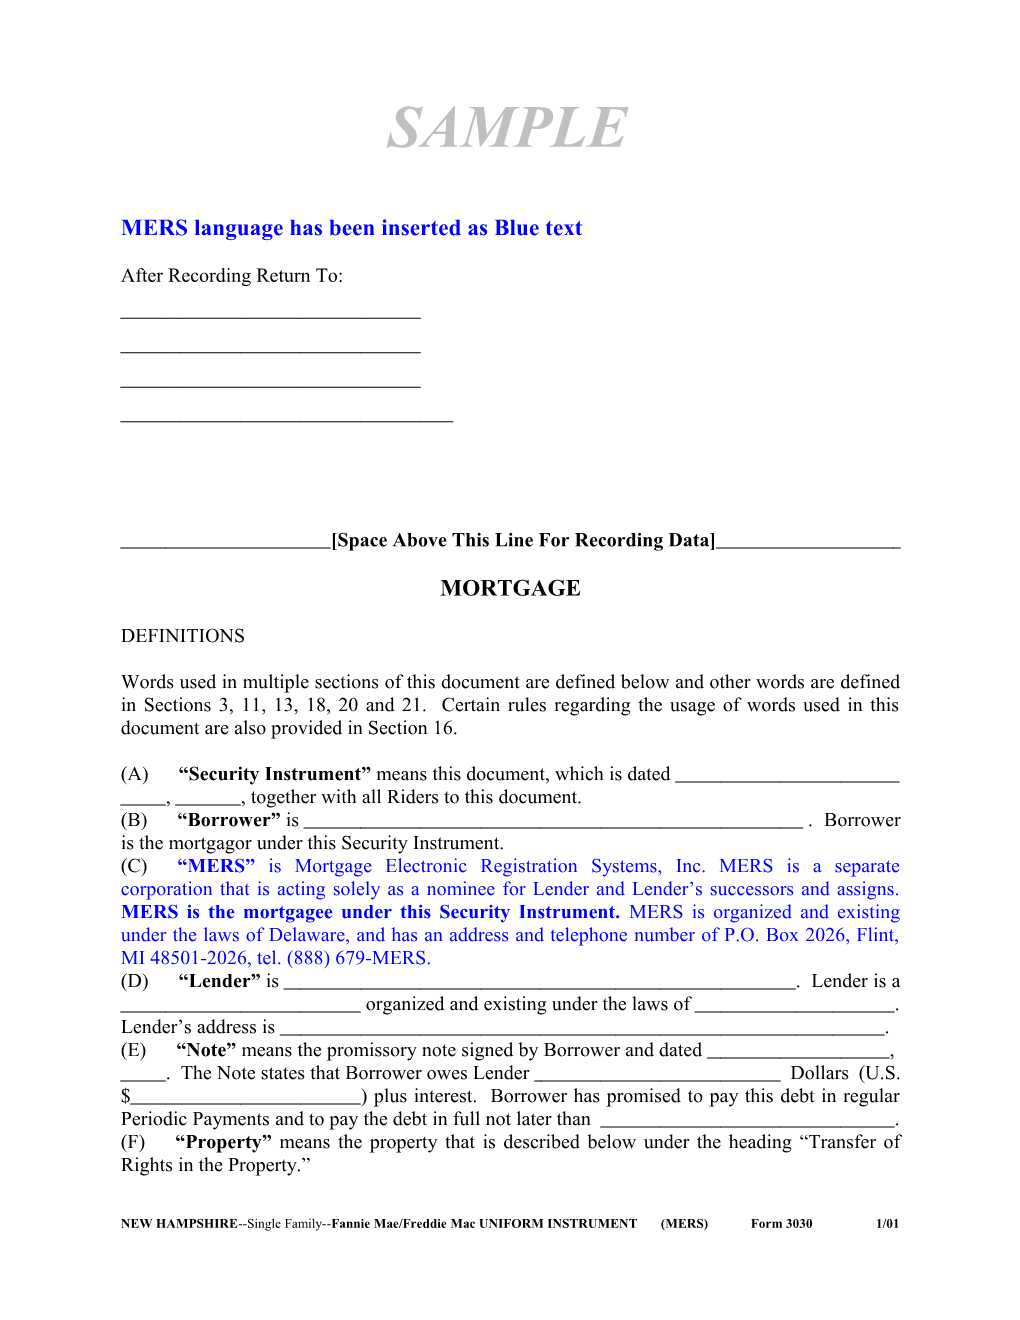 New Hampshire Mortgage (MERS)